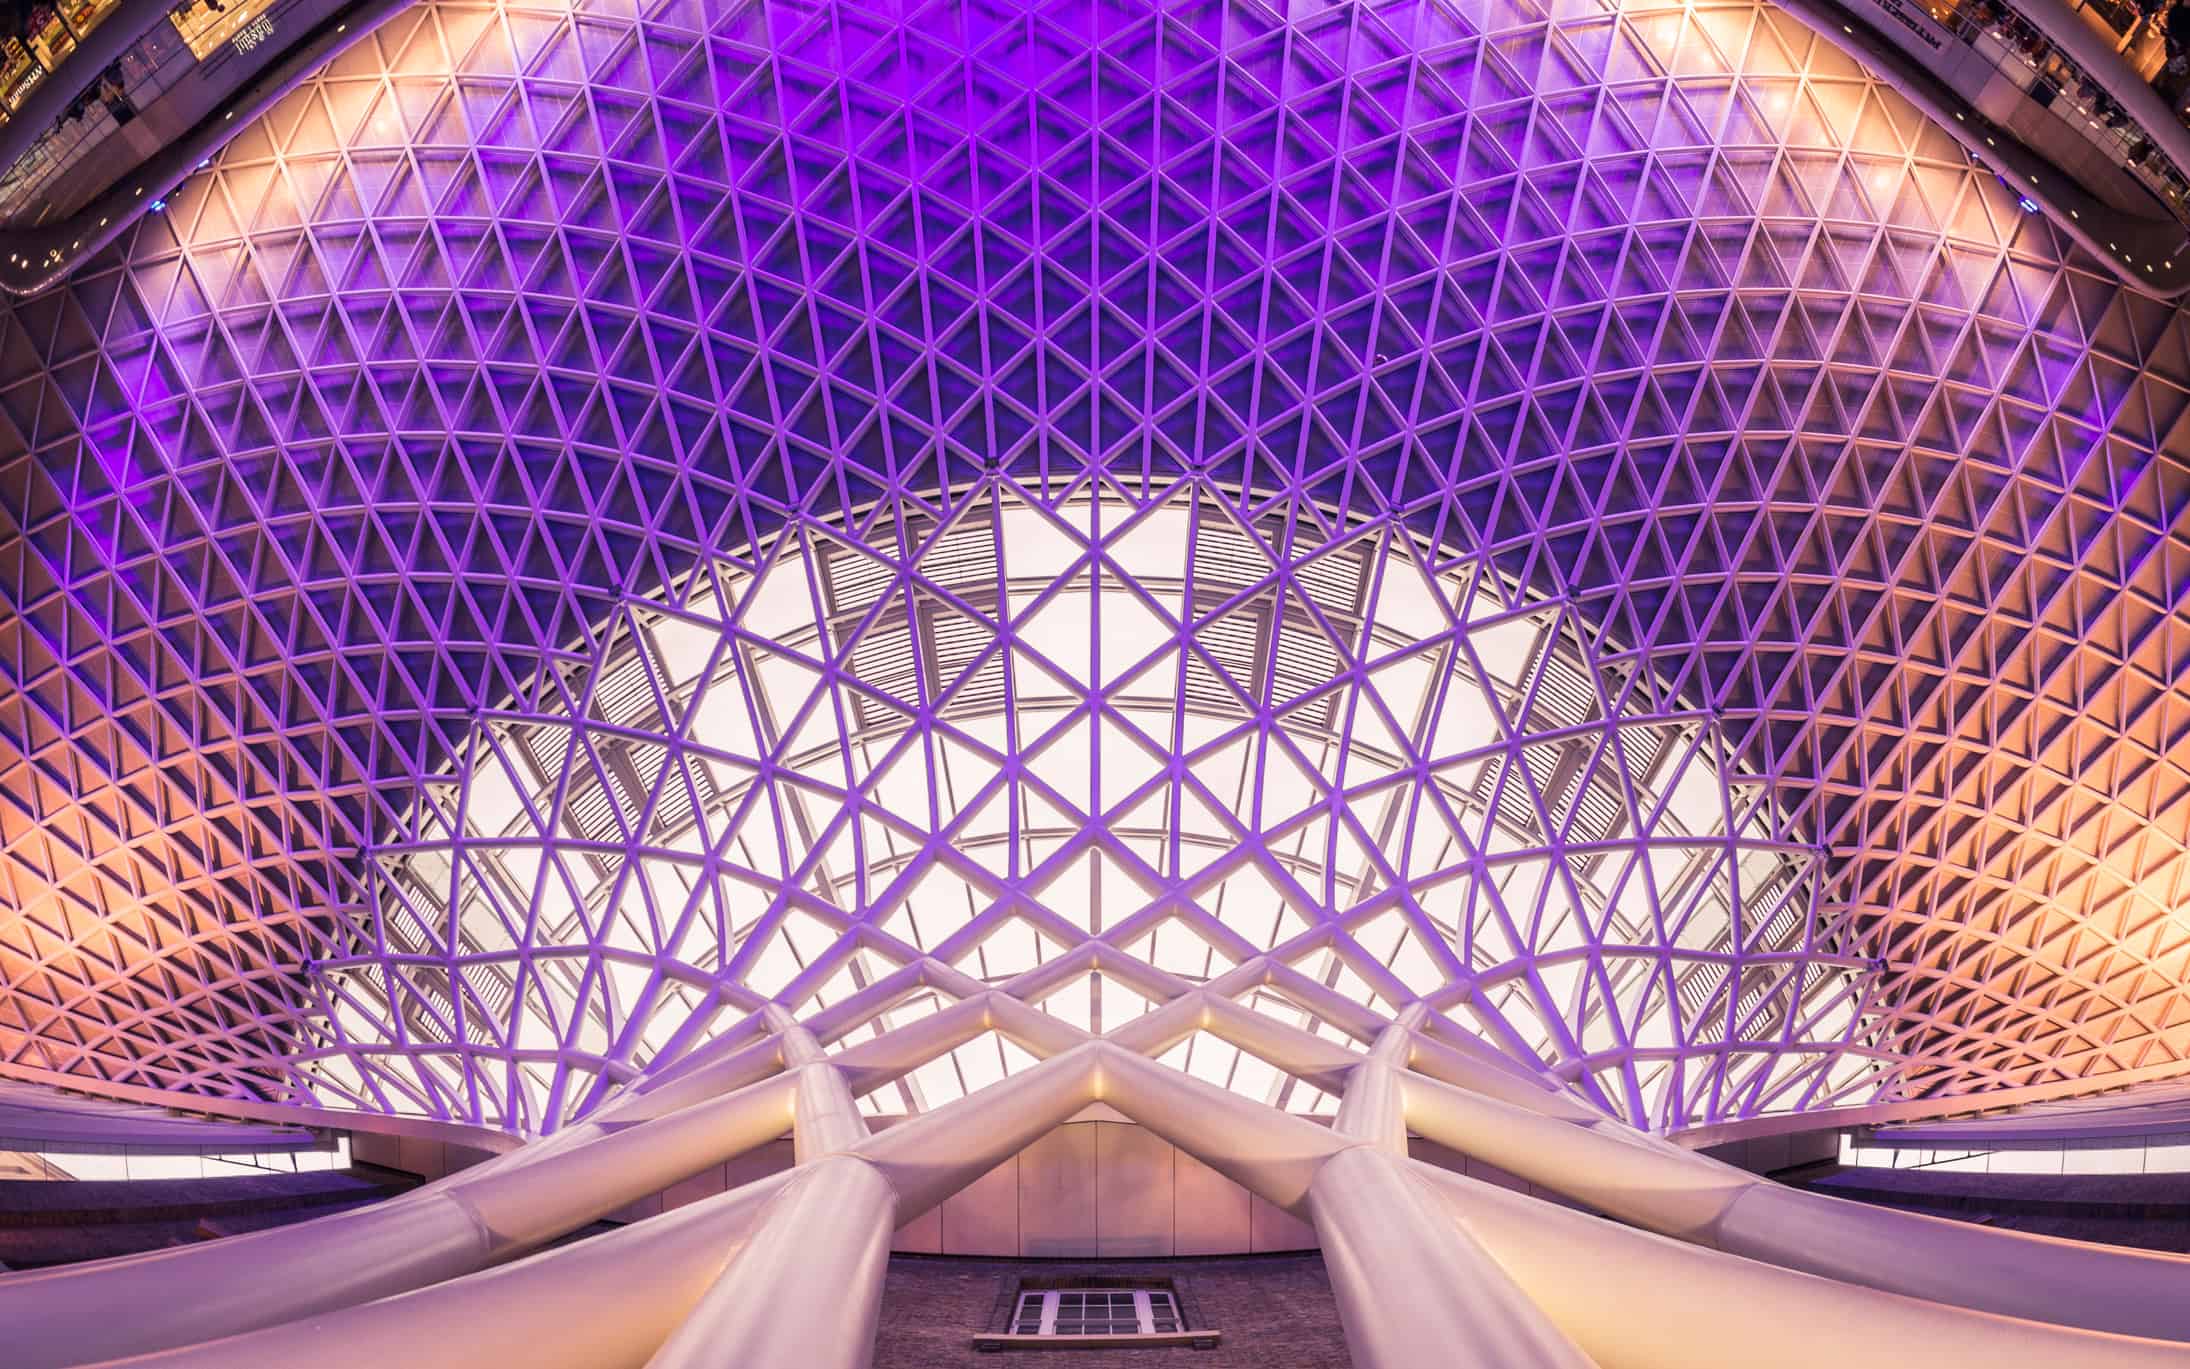 Kings Cross Ceiling Architecture